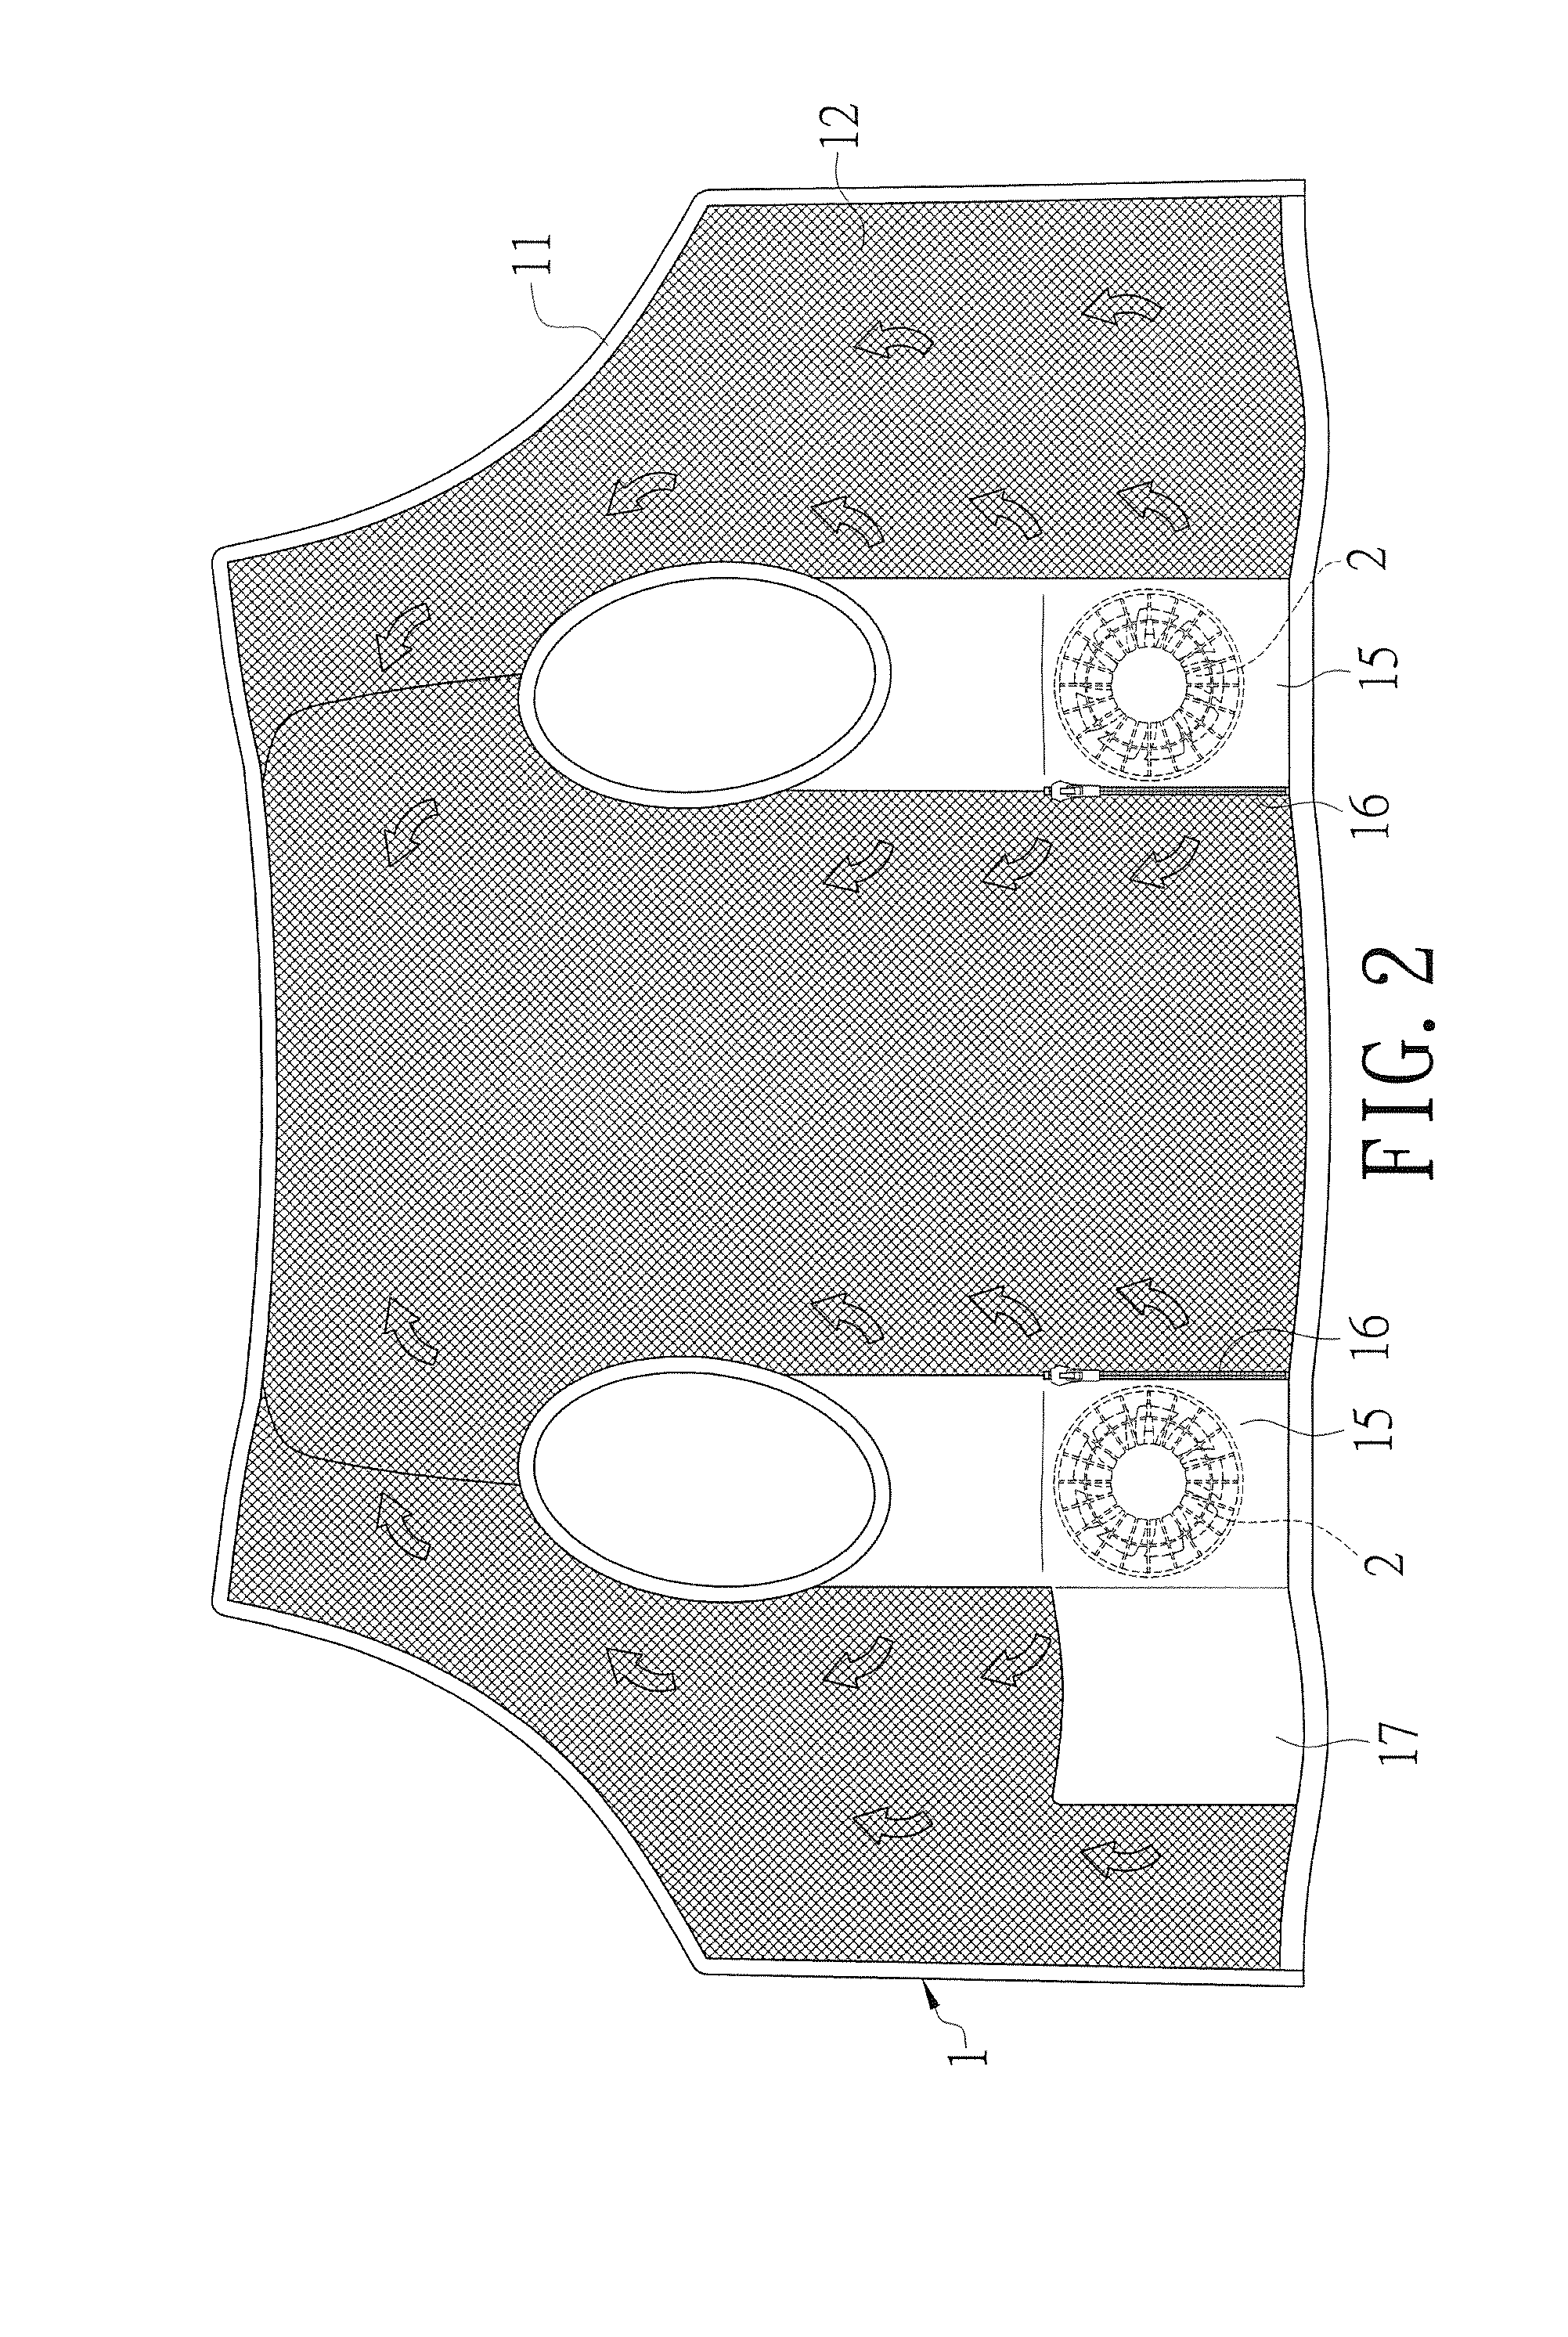 Clothes structure with temperature falling device